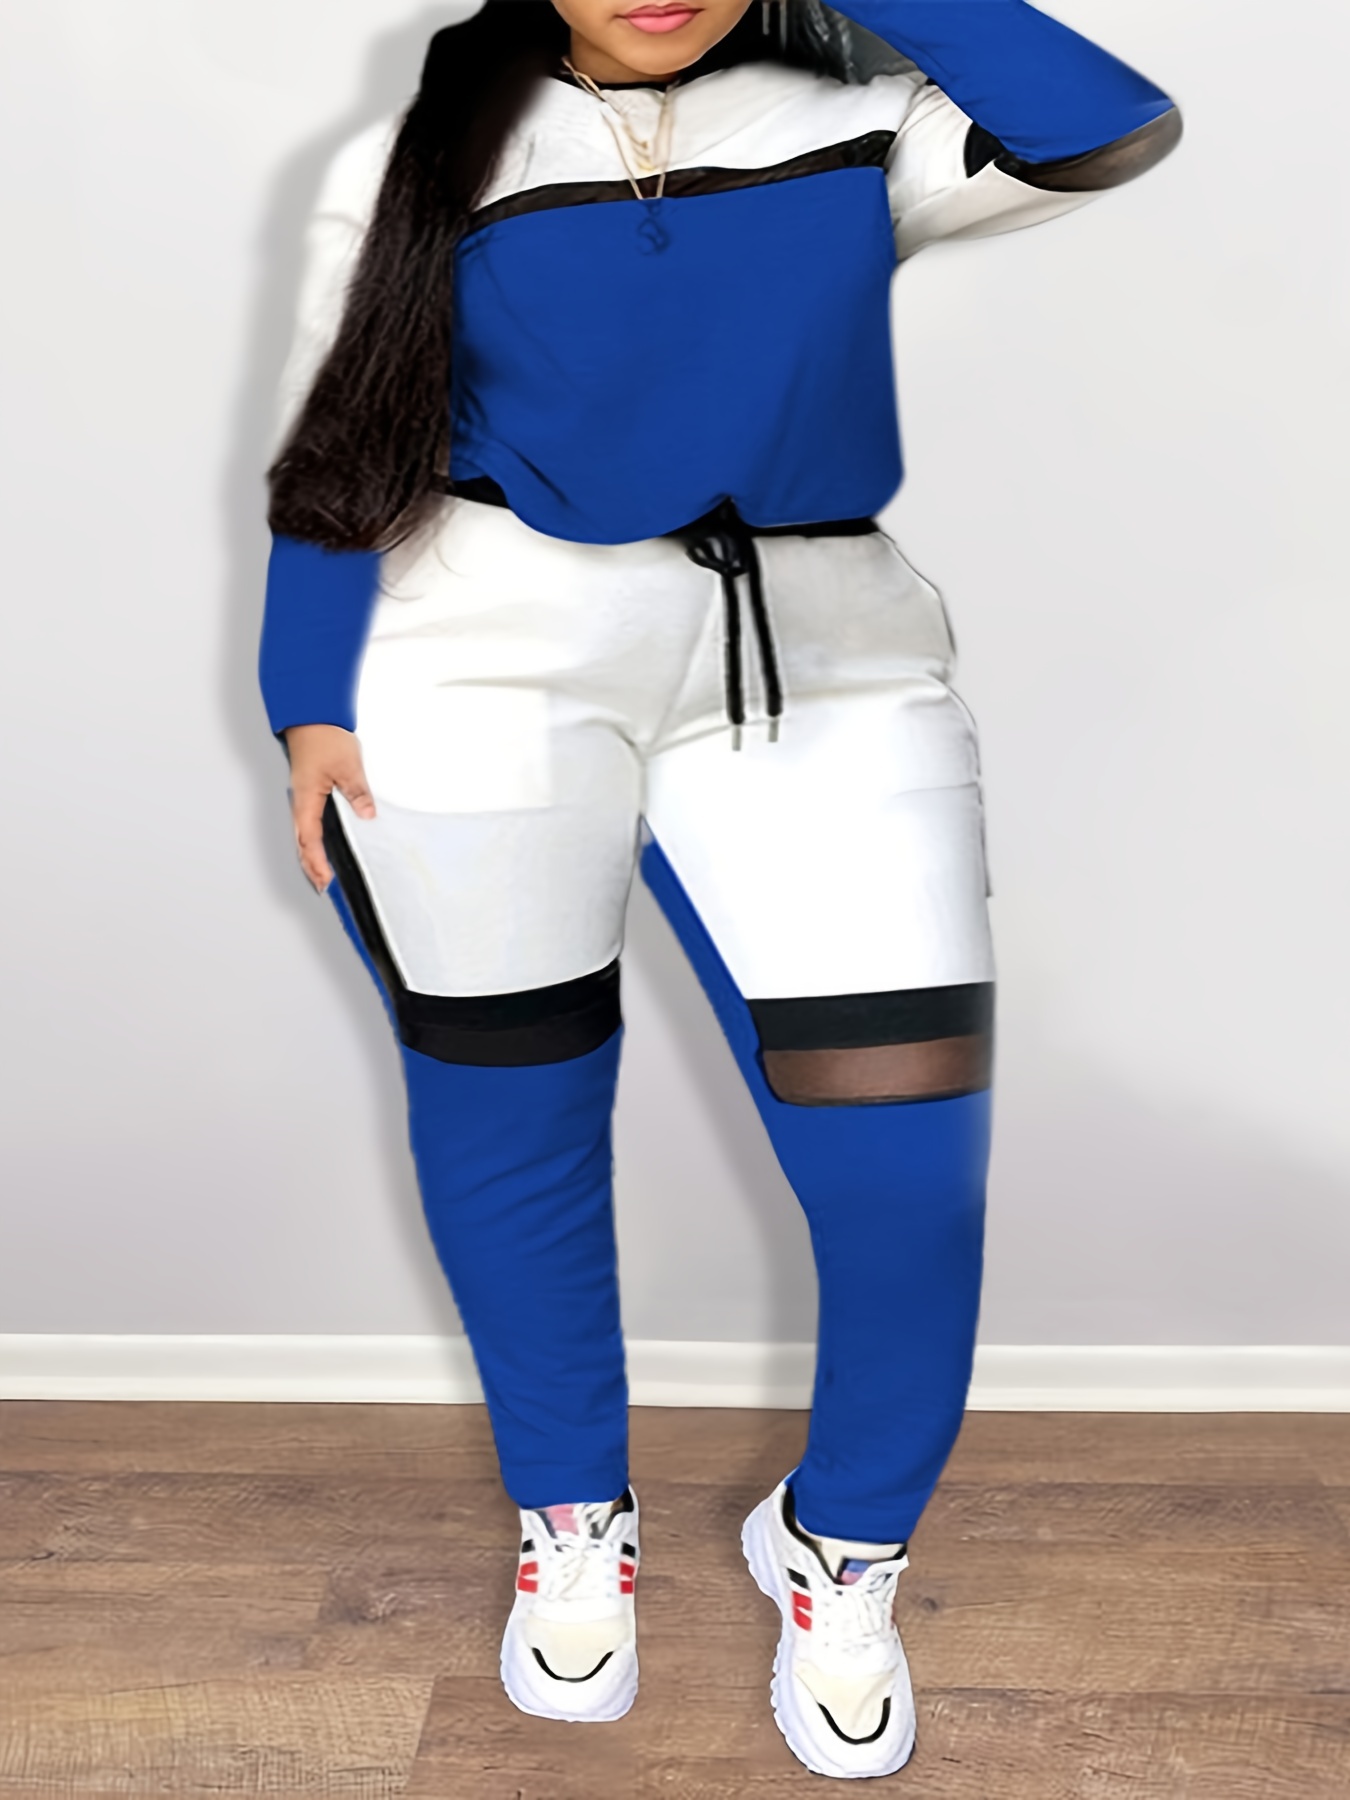 Plus Size Designer Tracksuit Set For Women Casual Outfit With Top